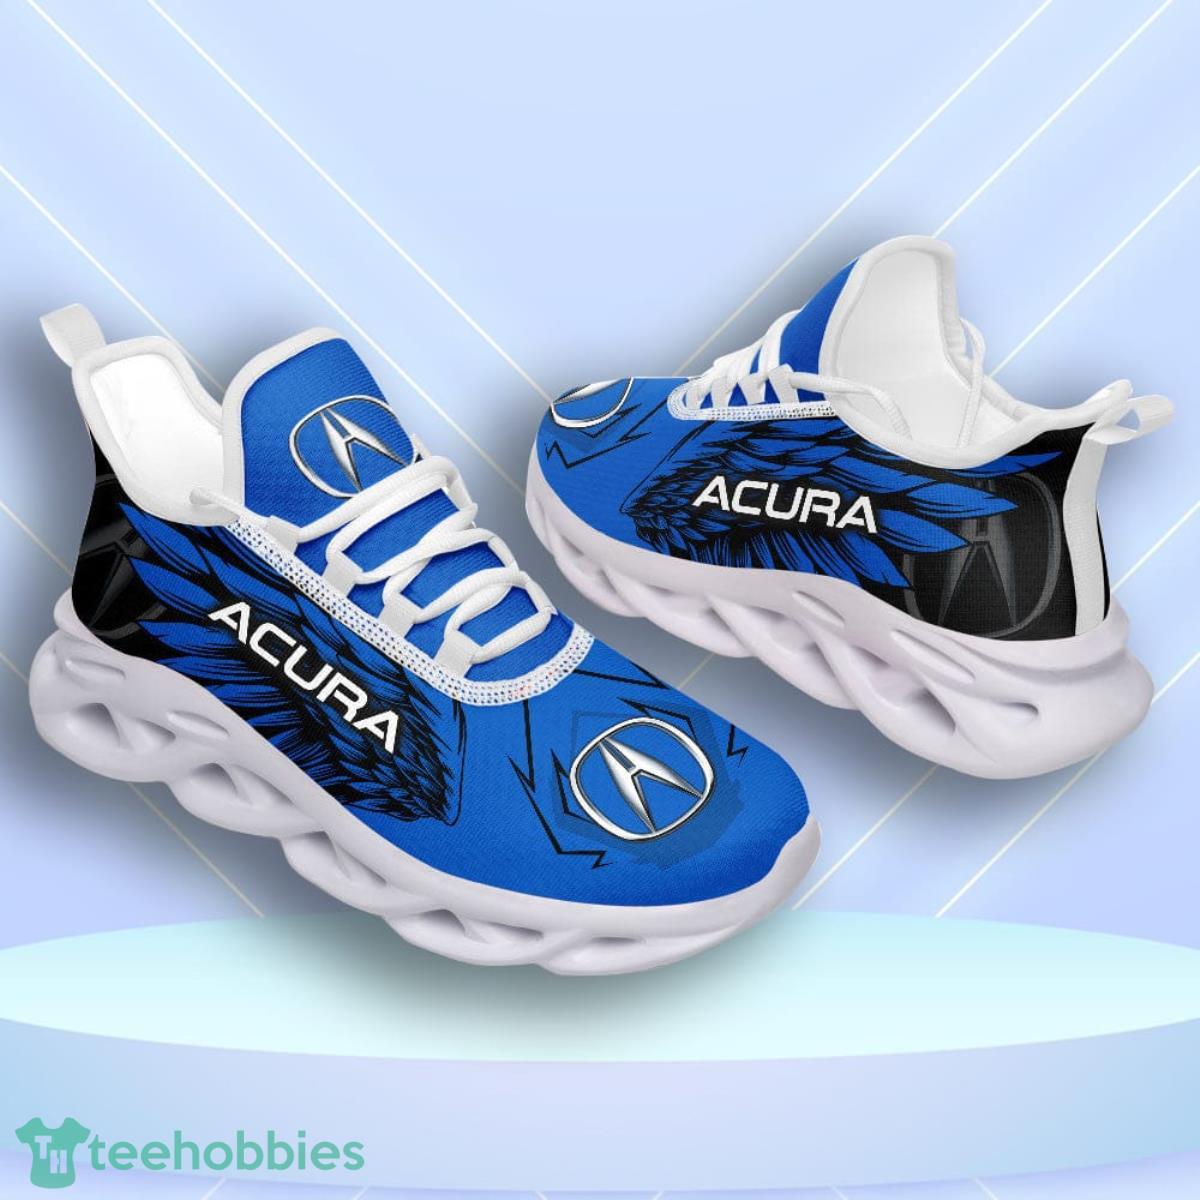 Acura Team Max Soul Shoes Running Sneakers Product Photo 1